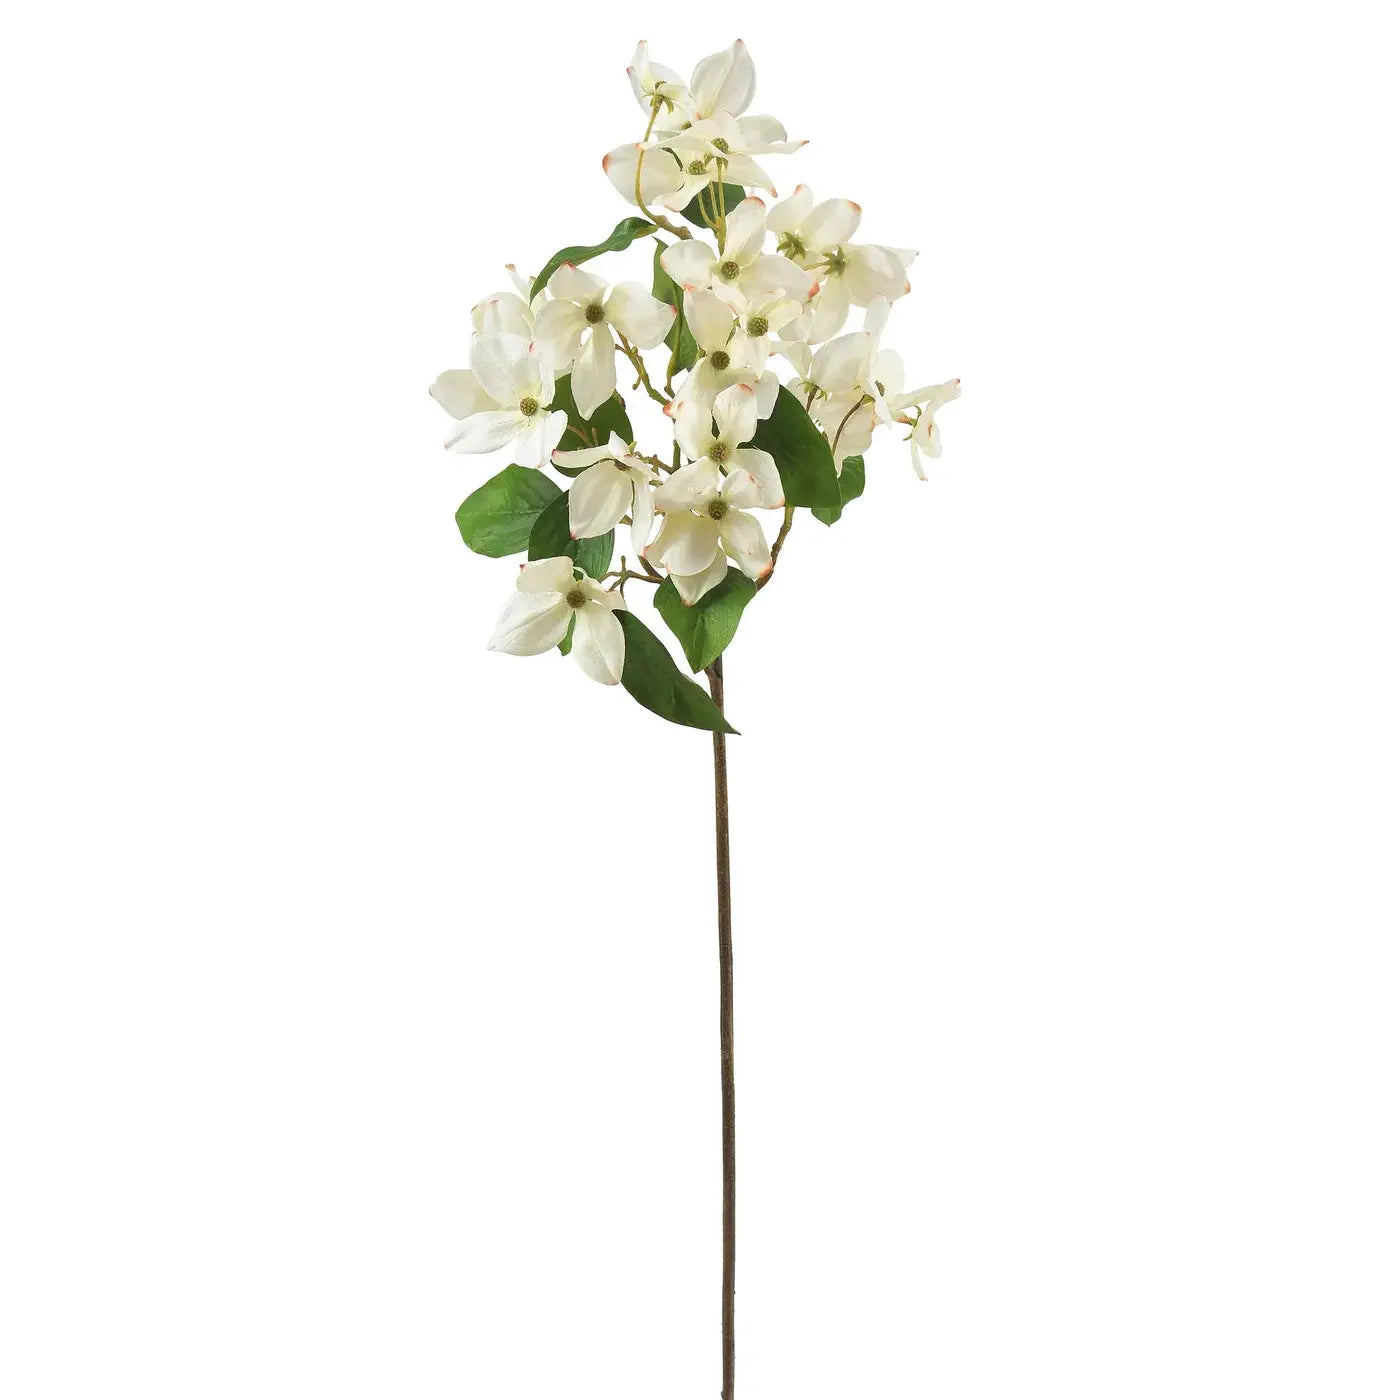 Dogwood Branches 28" in Creamy White - Home Smith